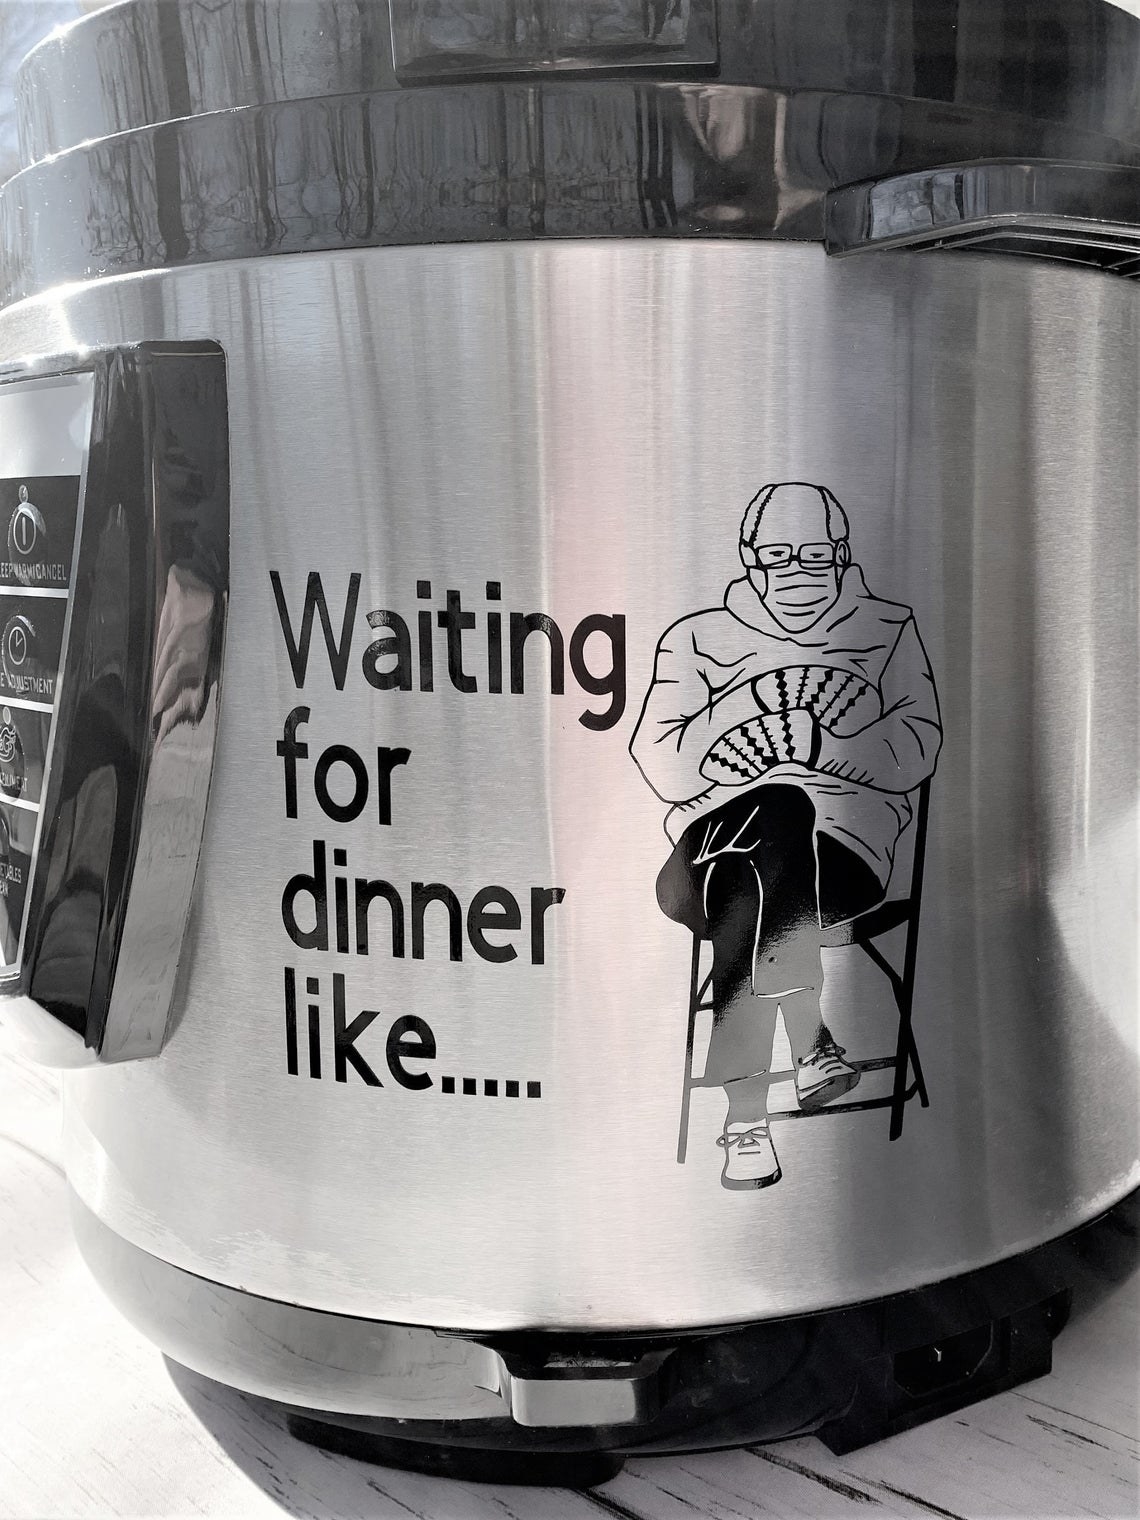 The Bernie Sanders at Inauguration Day Instant Pot Decal that says &quot;Waiting for dinner like....&quot;